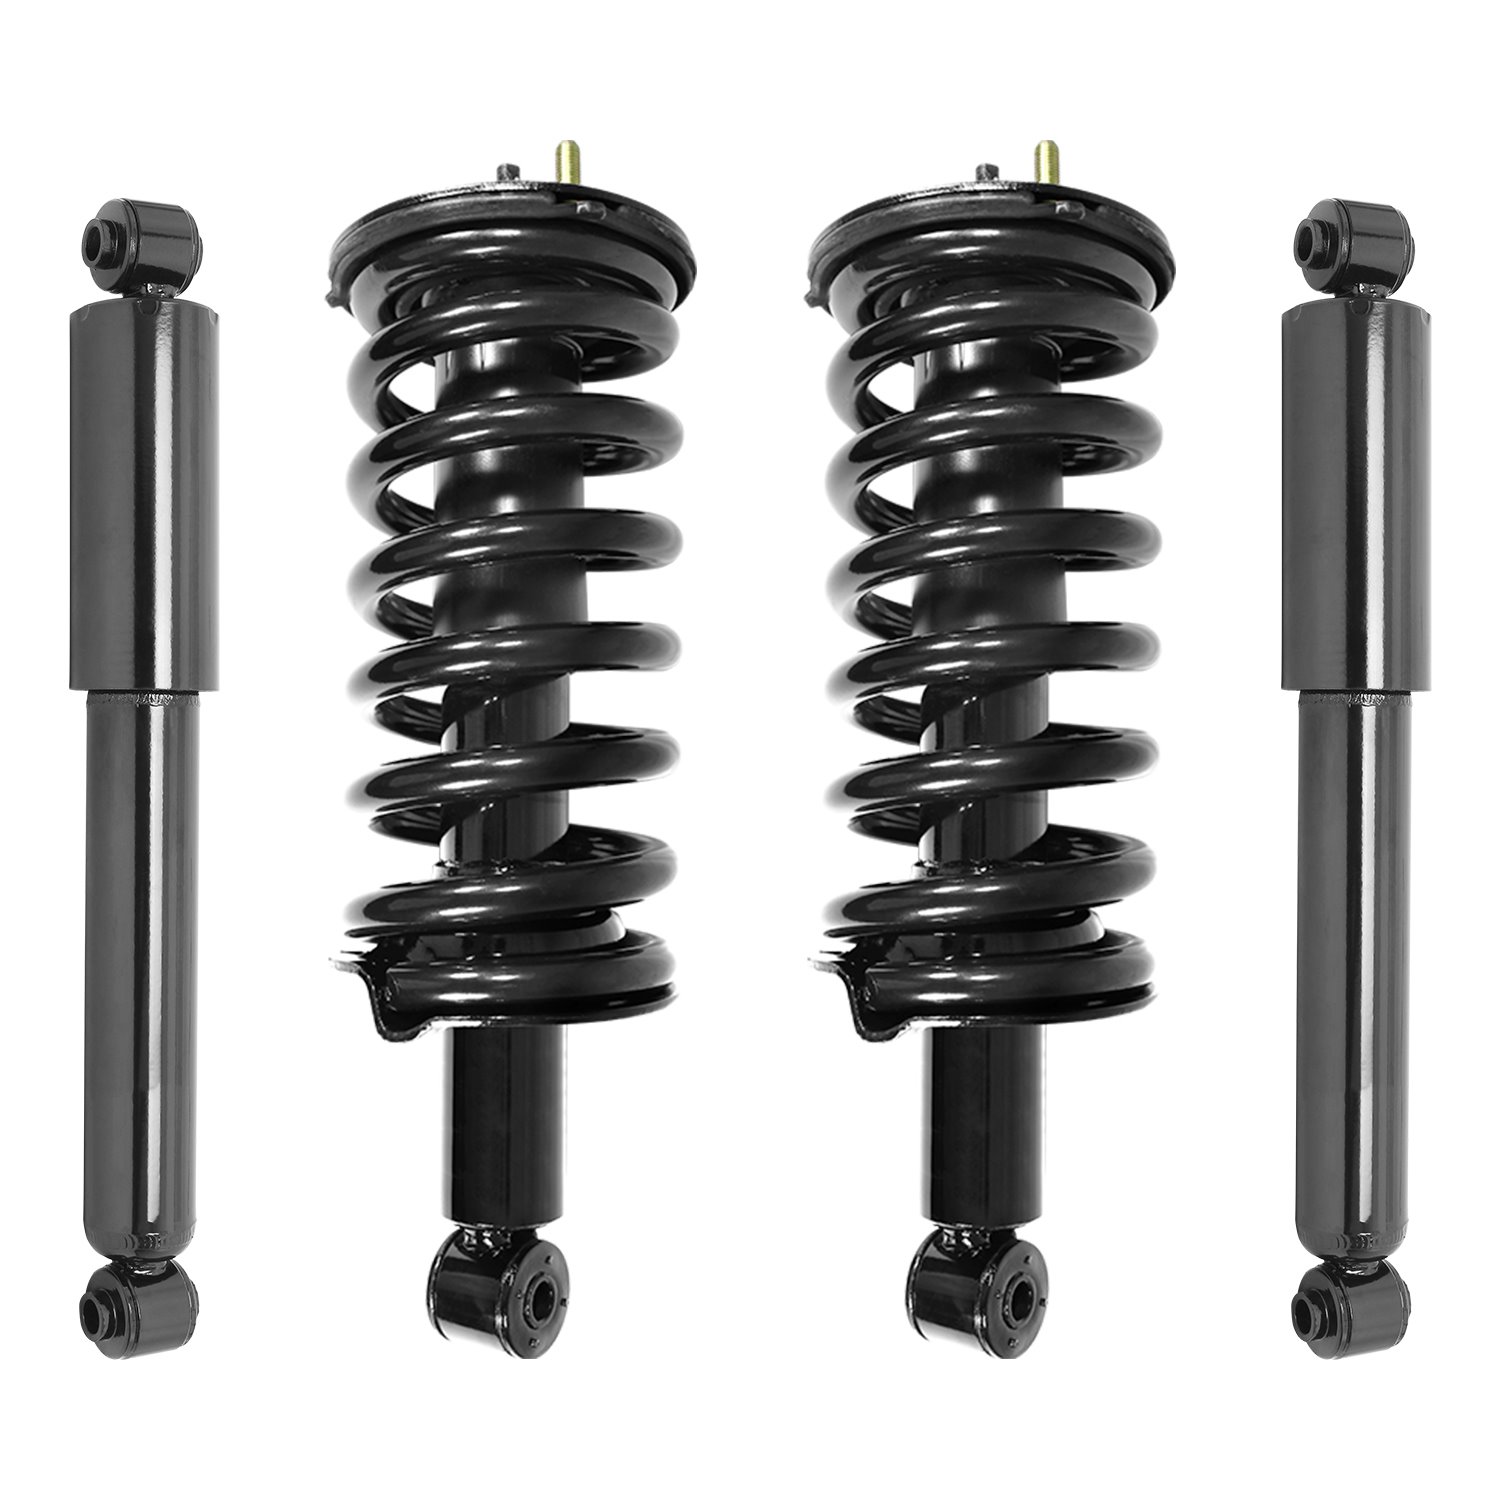 4-11300-255040-001 Front & Rear Suspension Strut & Coil Spring Assembly Fits Select Nissan Pathfinder Armada, Nissan Armada